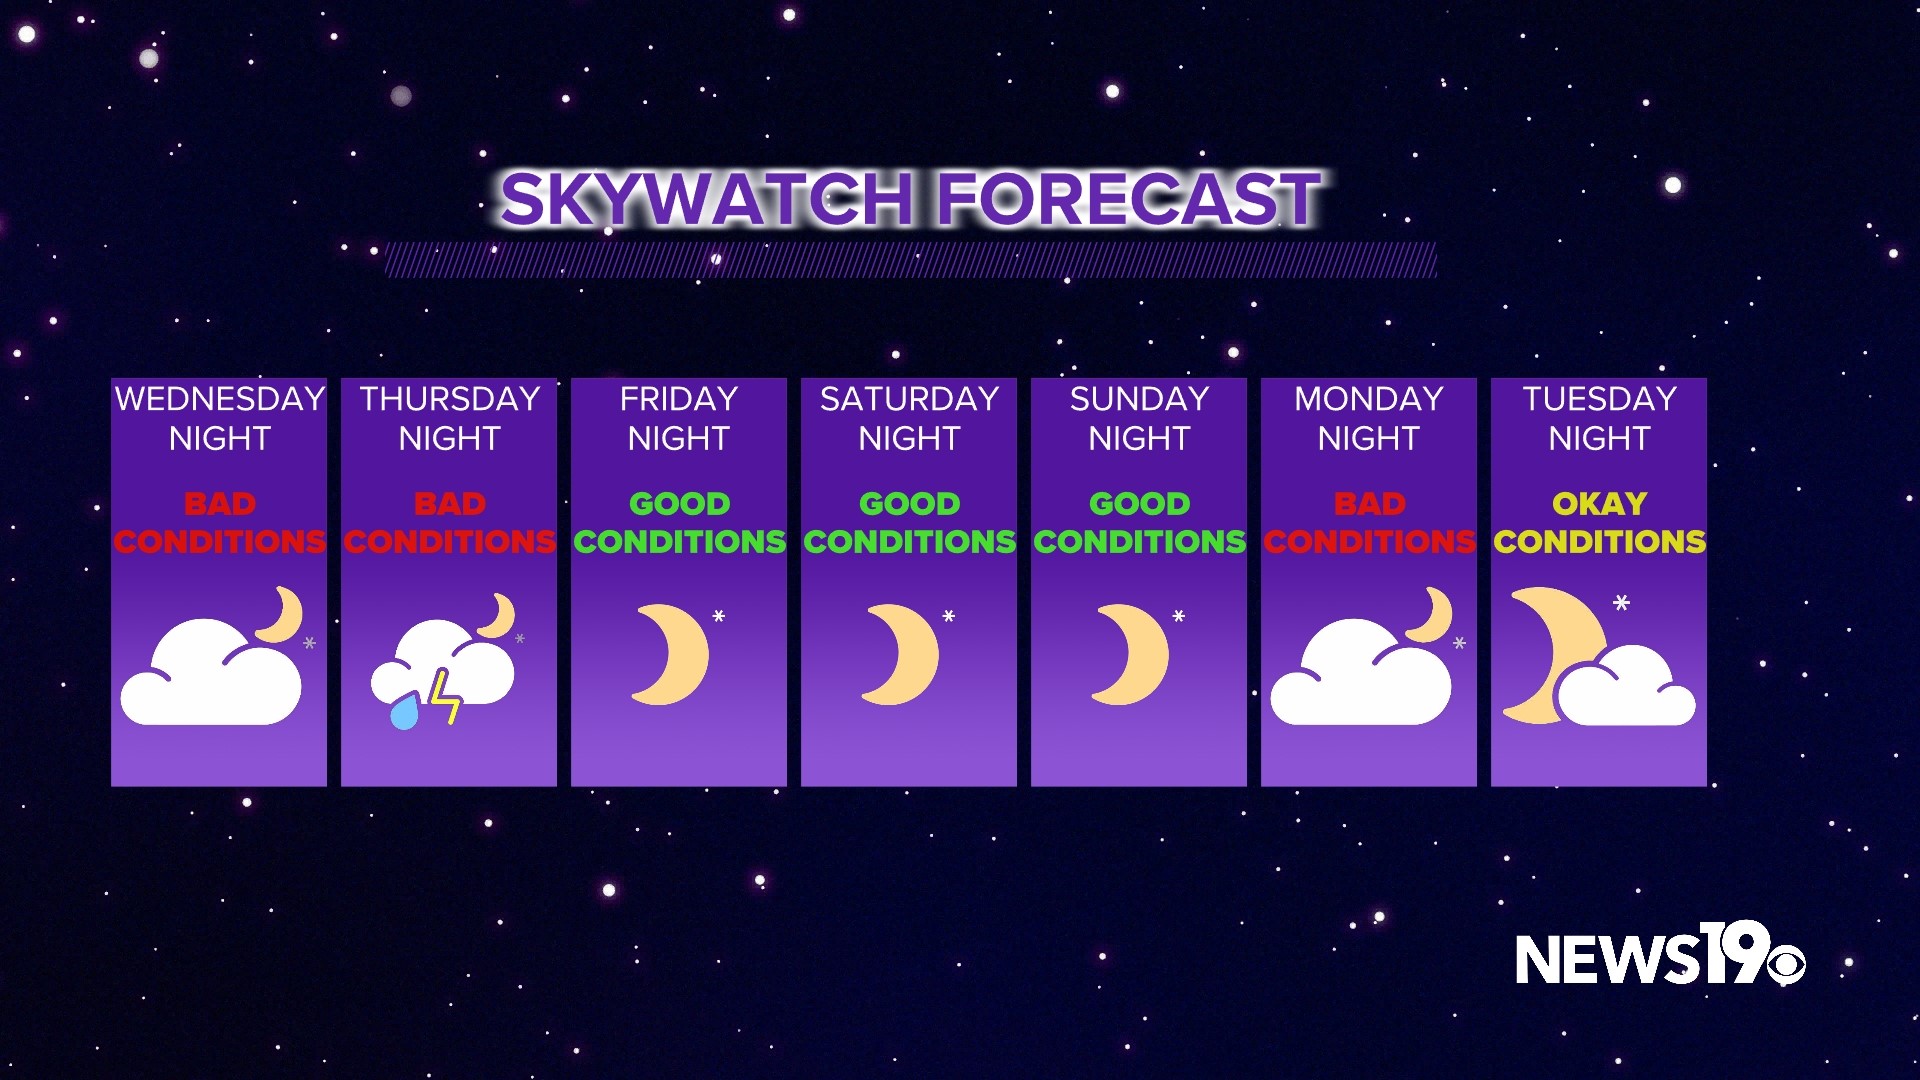 Clear conditions this weekend will make for some great viewing of the night sky. From planets, to the ISS, and more there will be plenty to see.